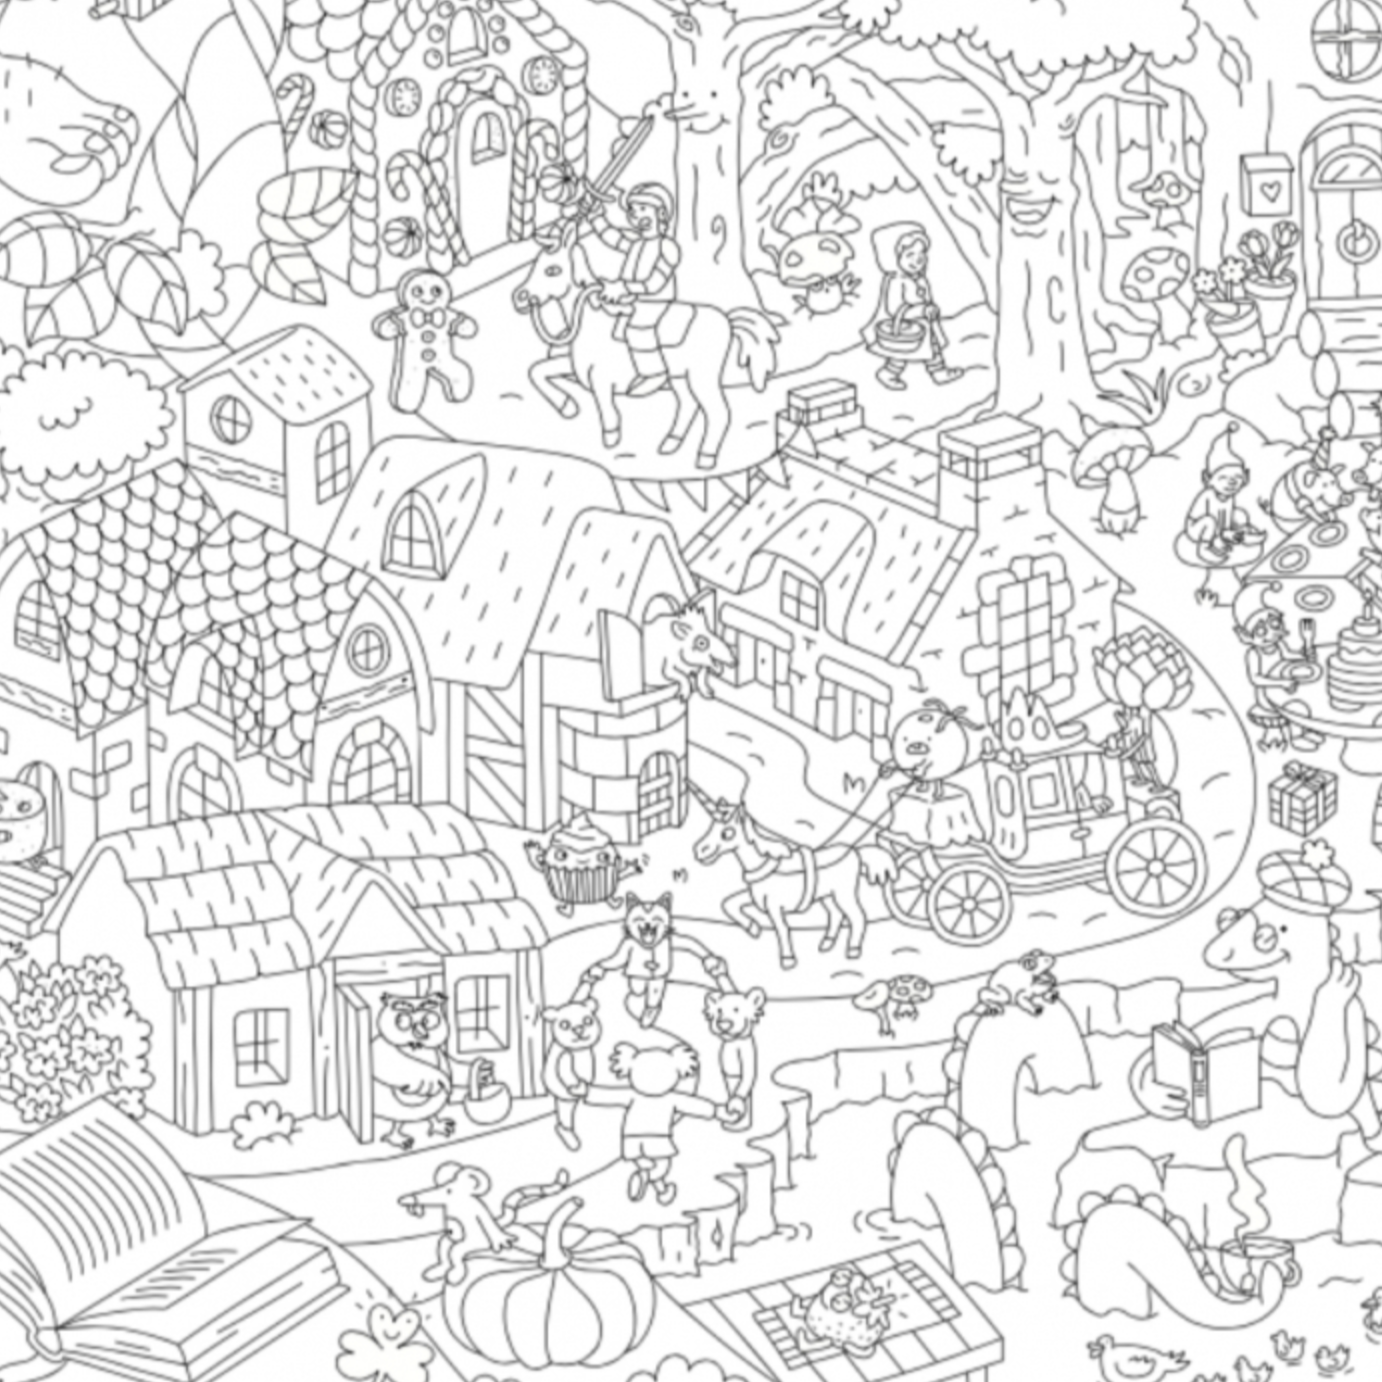 OMY Tales and Legend - XXL Colouring Poster